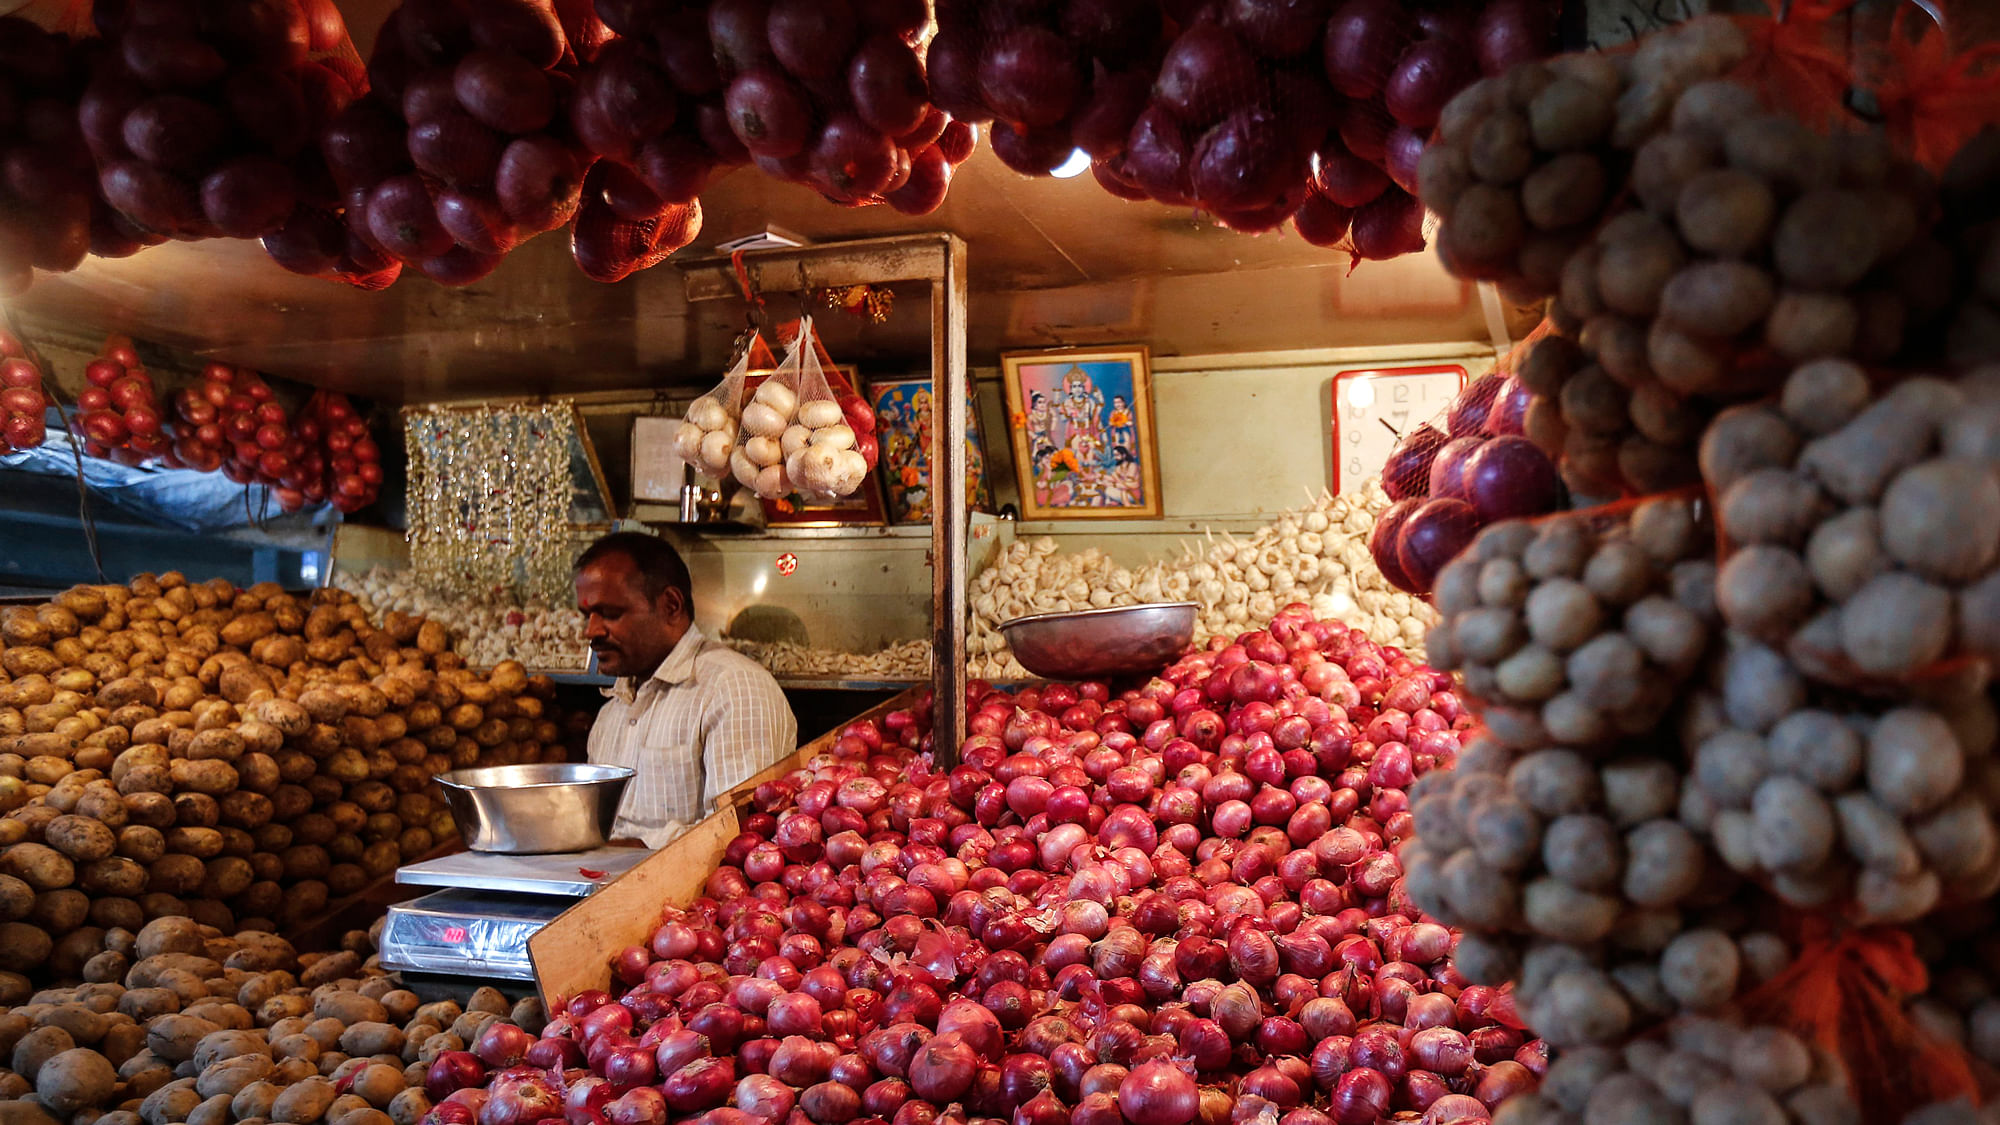 Inflation based on wholesale prices rose to 2.93 percent in February.